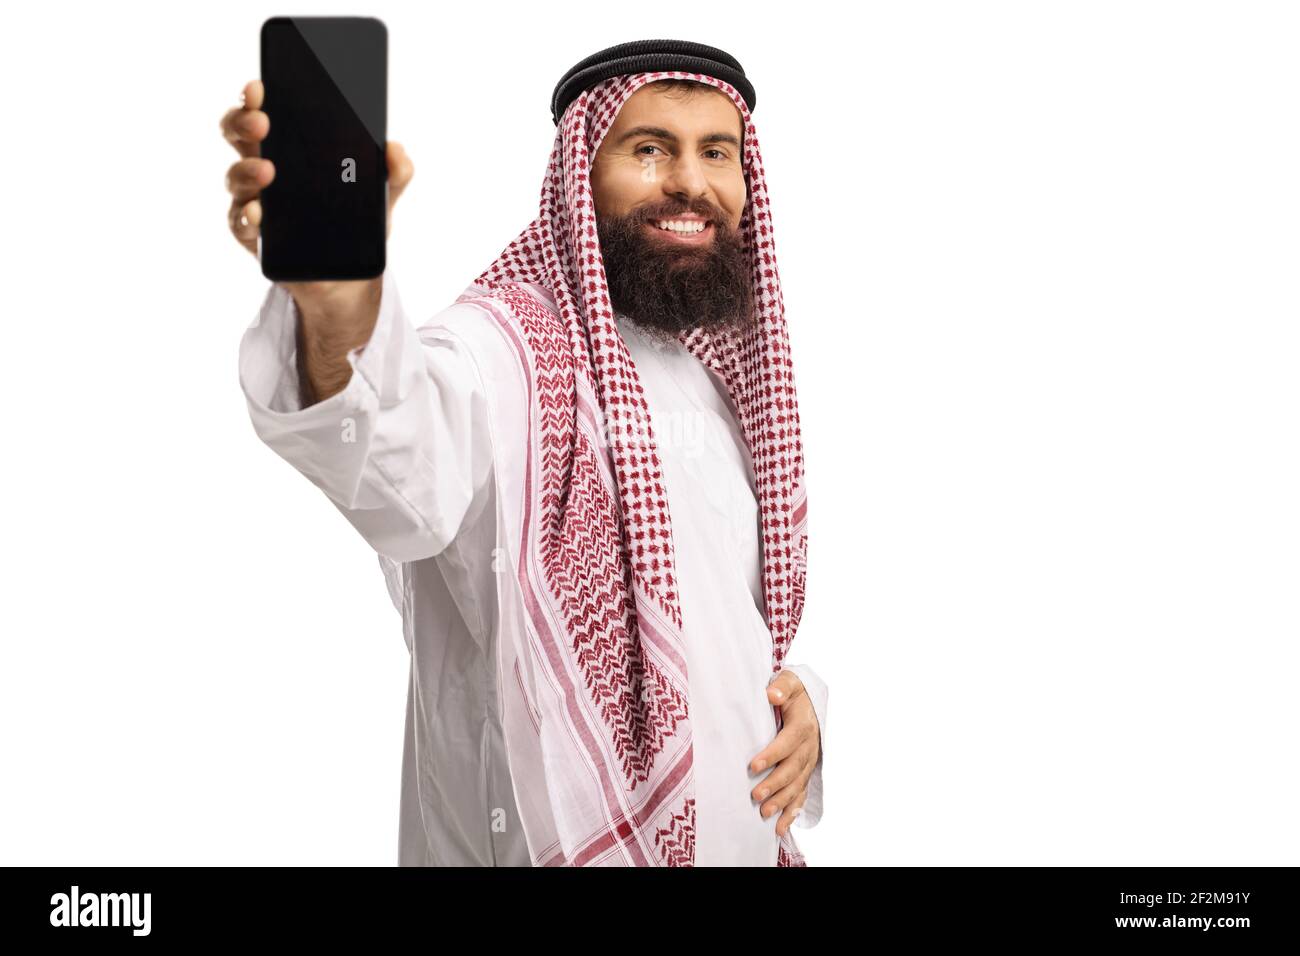 Smiling saudi arab man showing a mobile phone isolated on white background Stock Photo